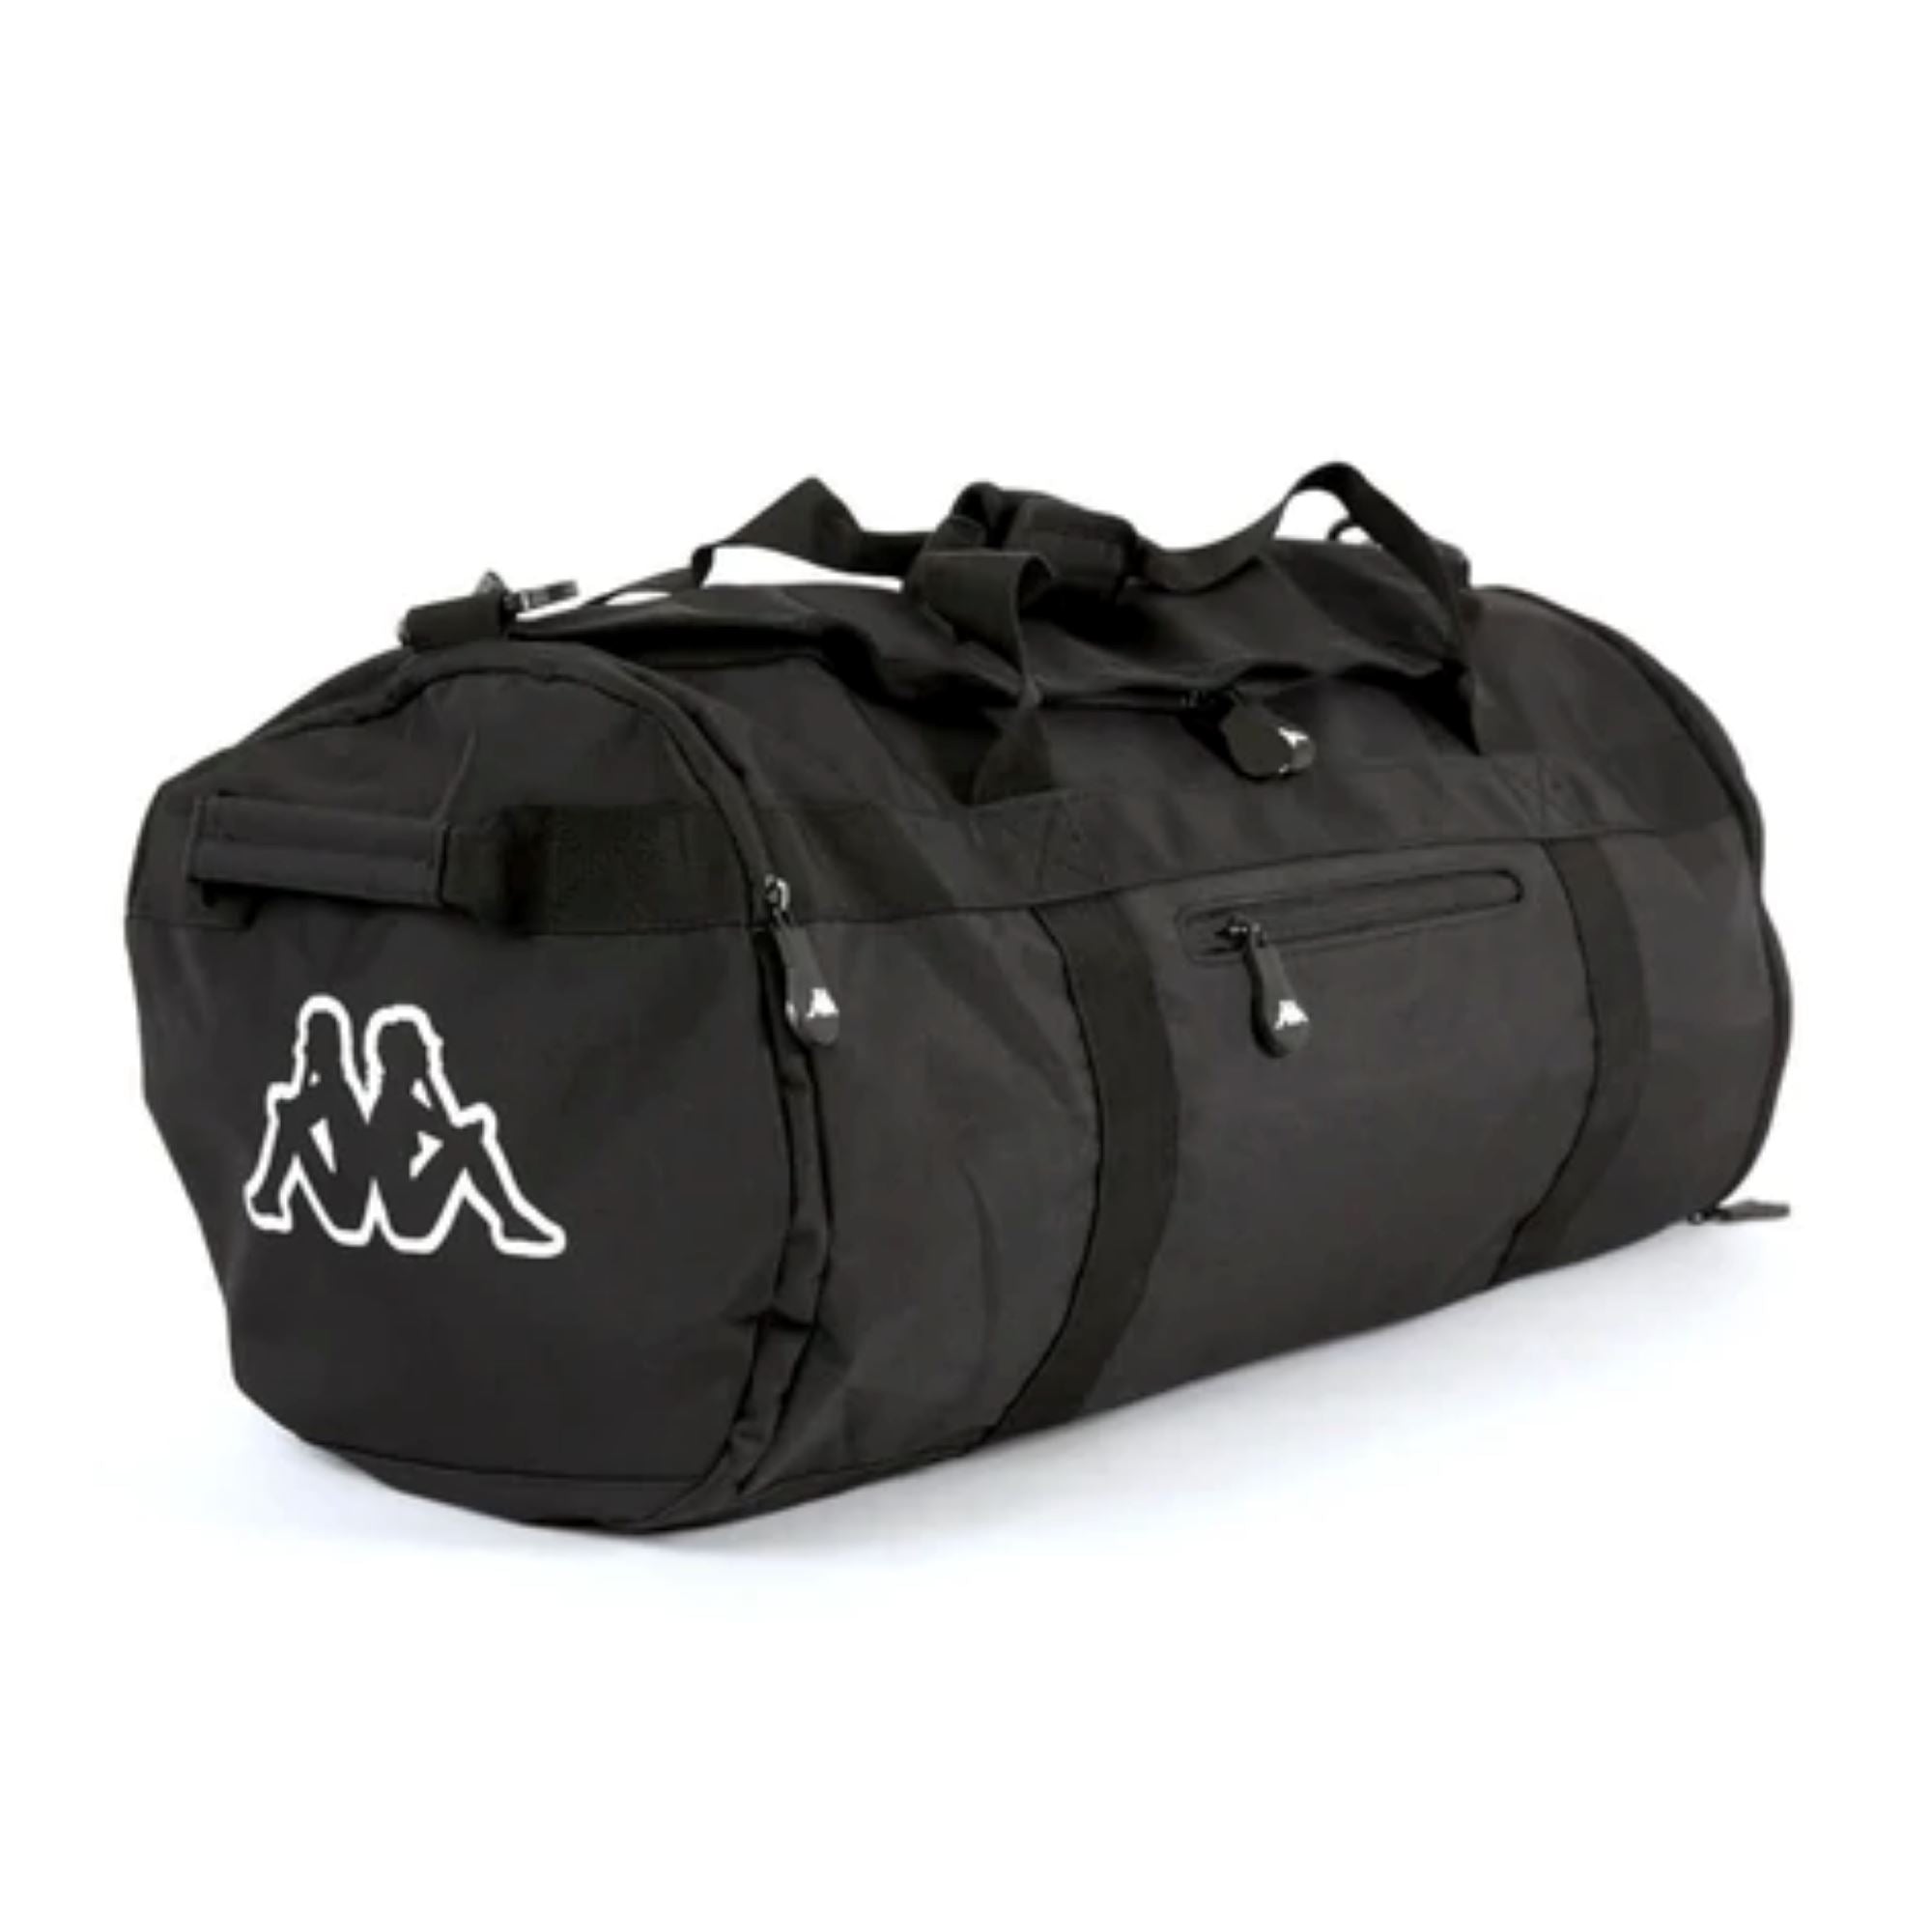 Kappa Tote Bag | Kappa Sports Bag with Shoe Compartment for Soccer ...